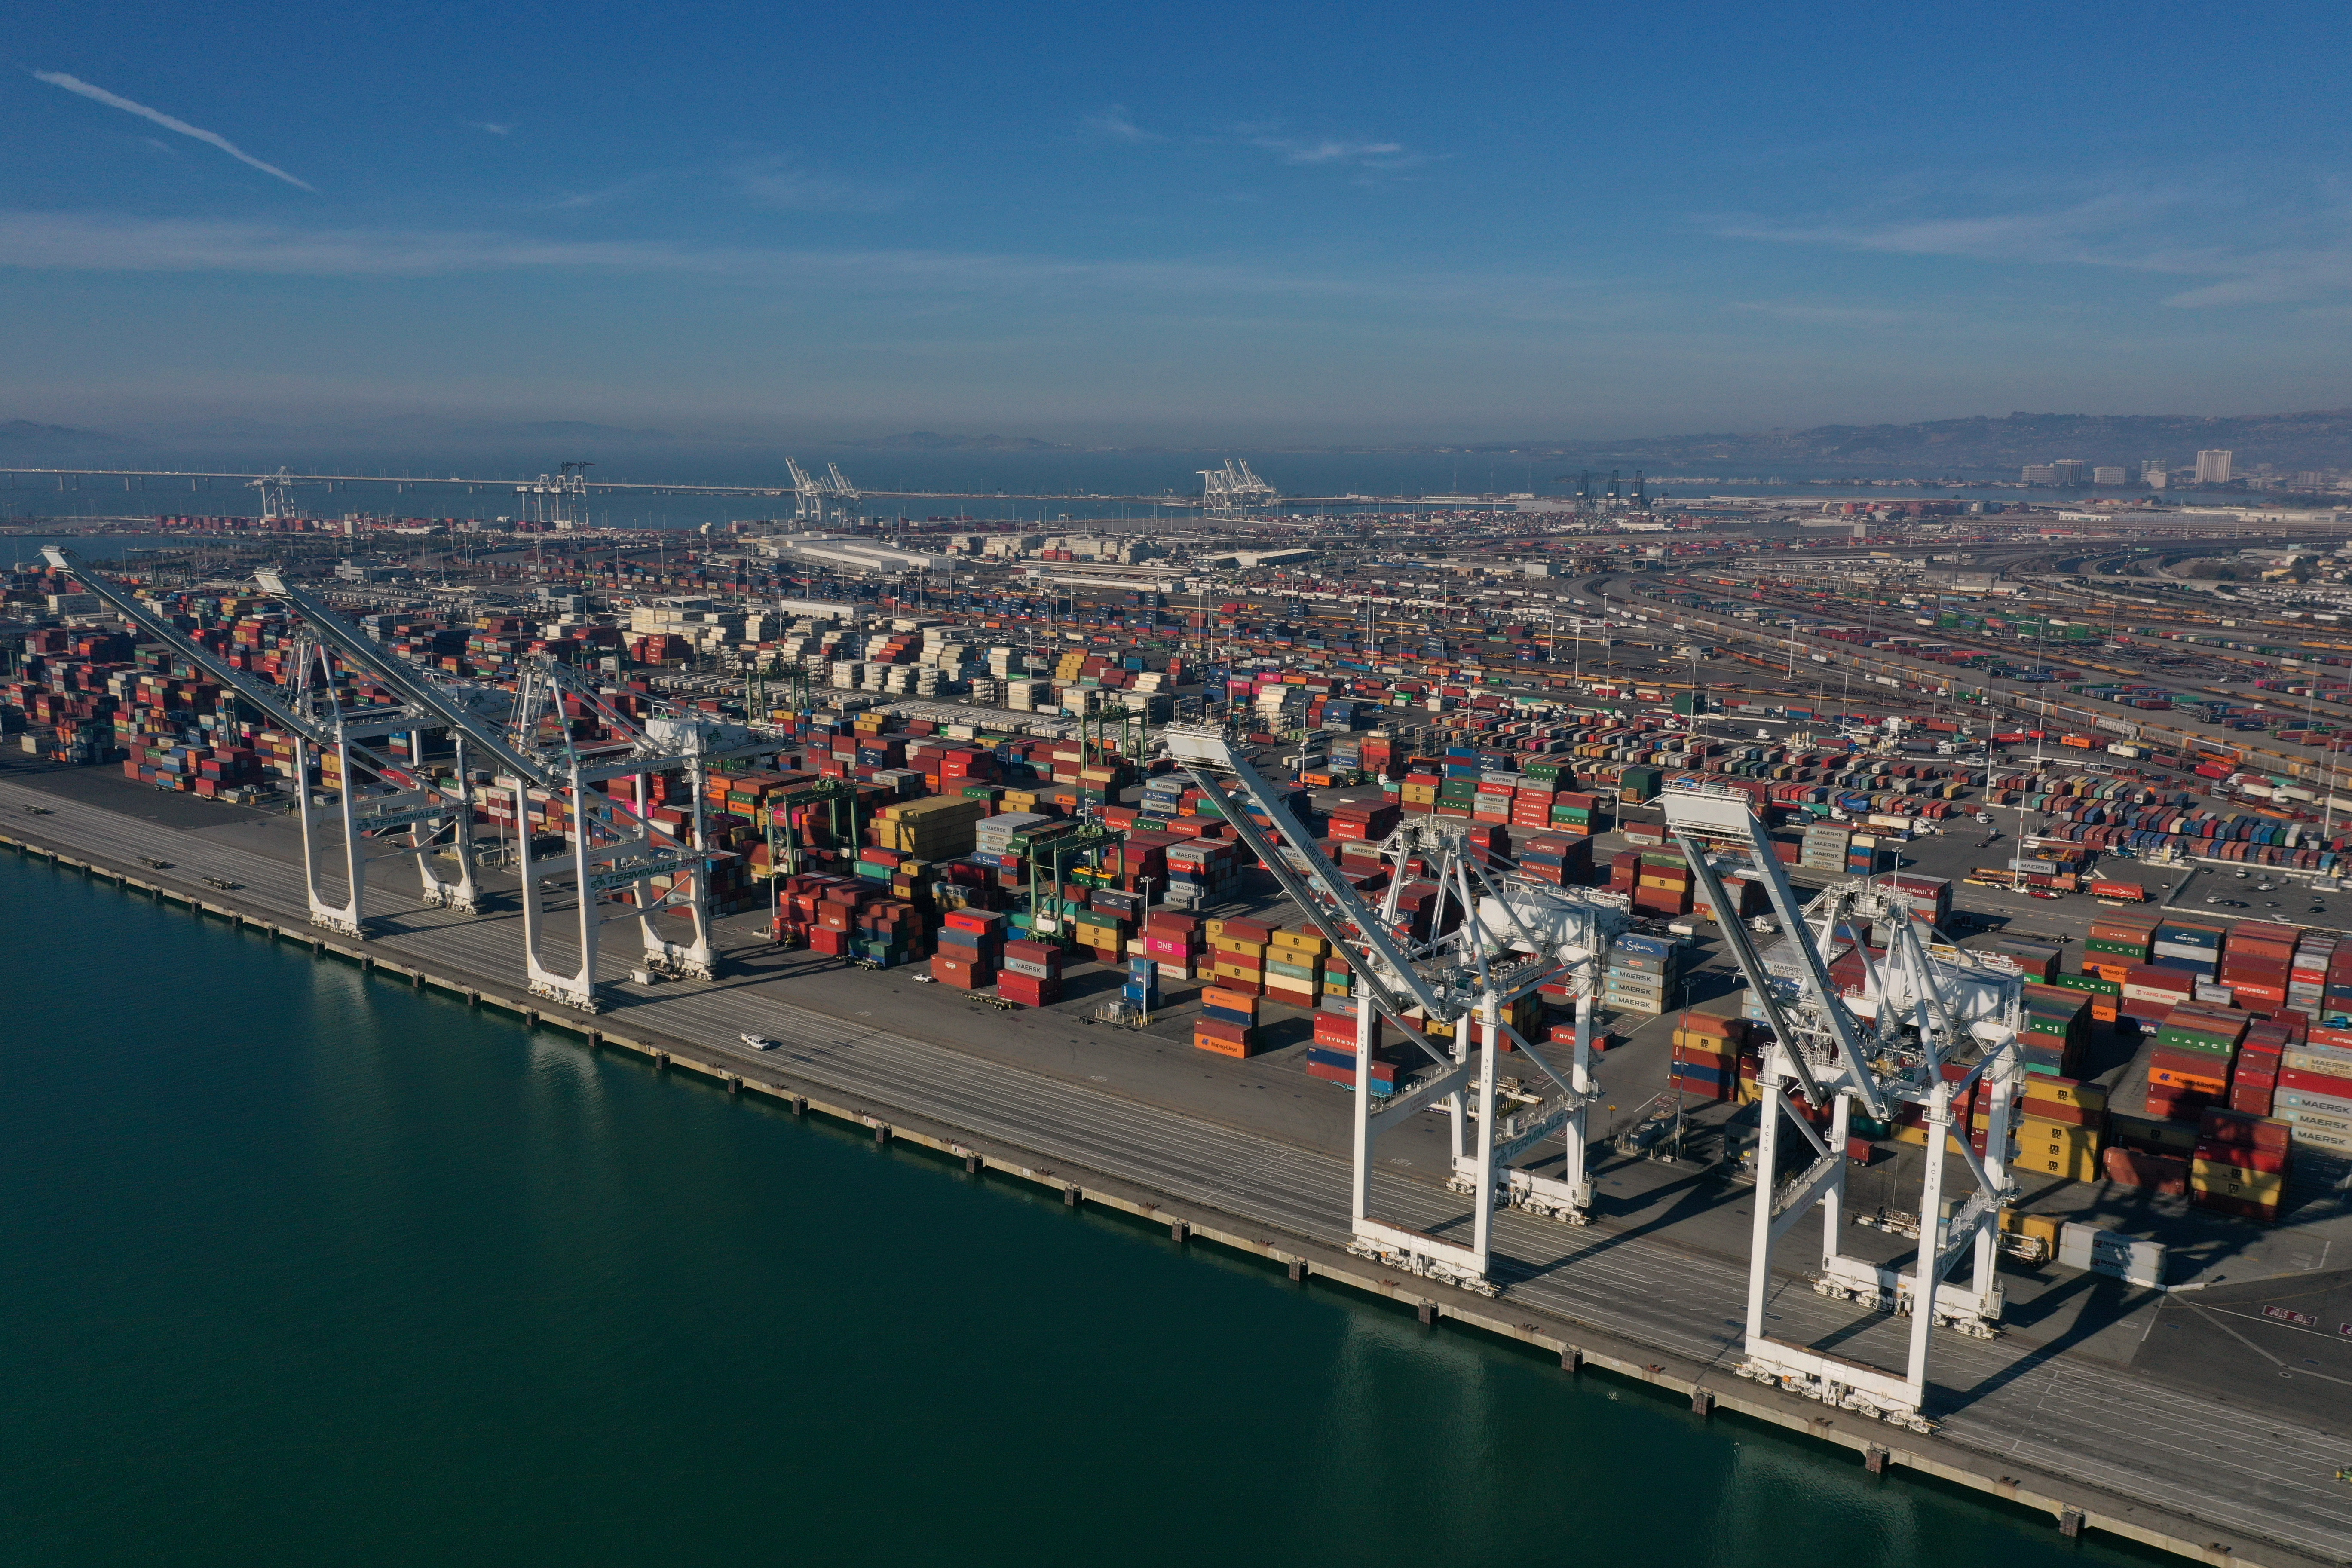 b23b4 PortofOakland 1 More Supply Met With Less Demand in Bay Area Housing Market